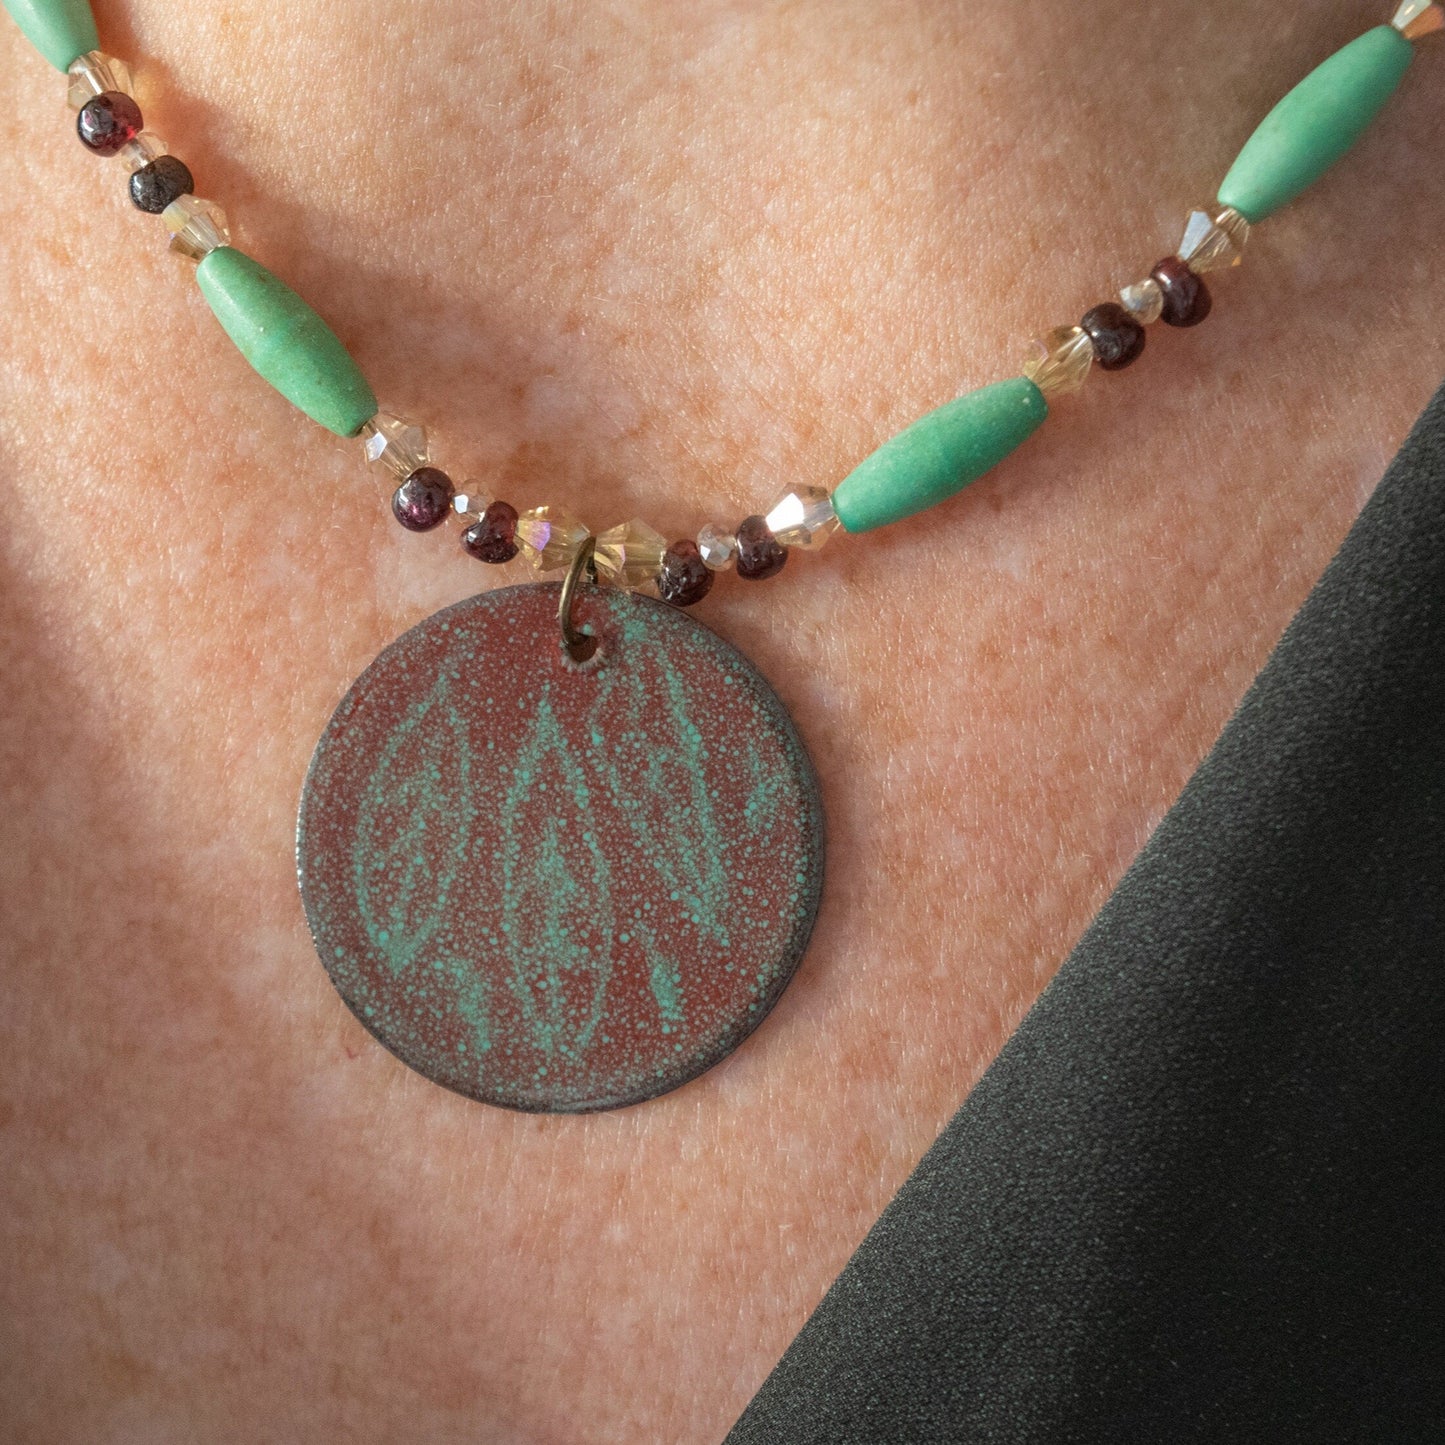 Red and Green Etched Leaf Enamel Pendant with Garnet and Magnesite Bead Necklace on model